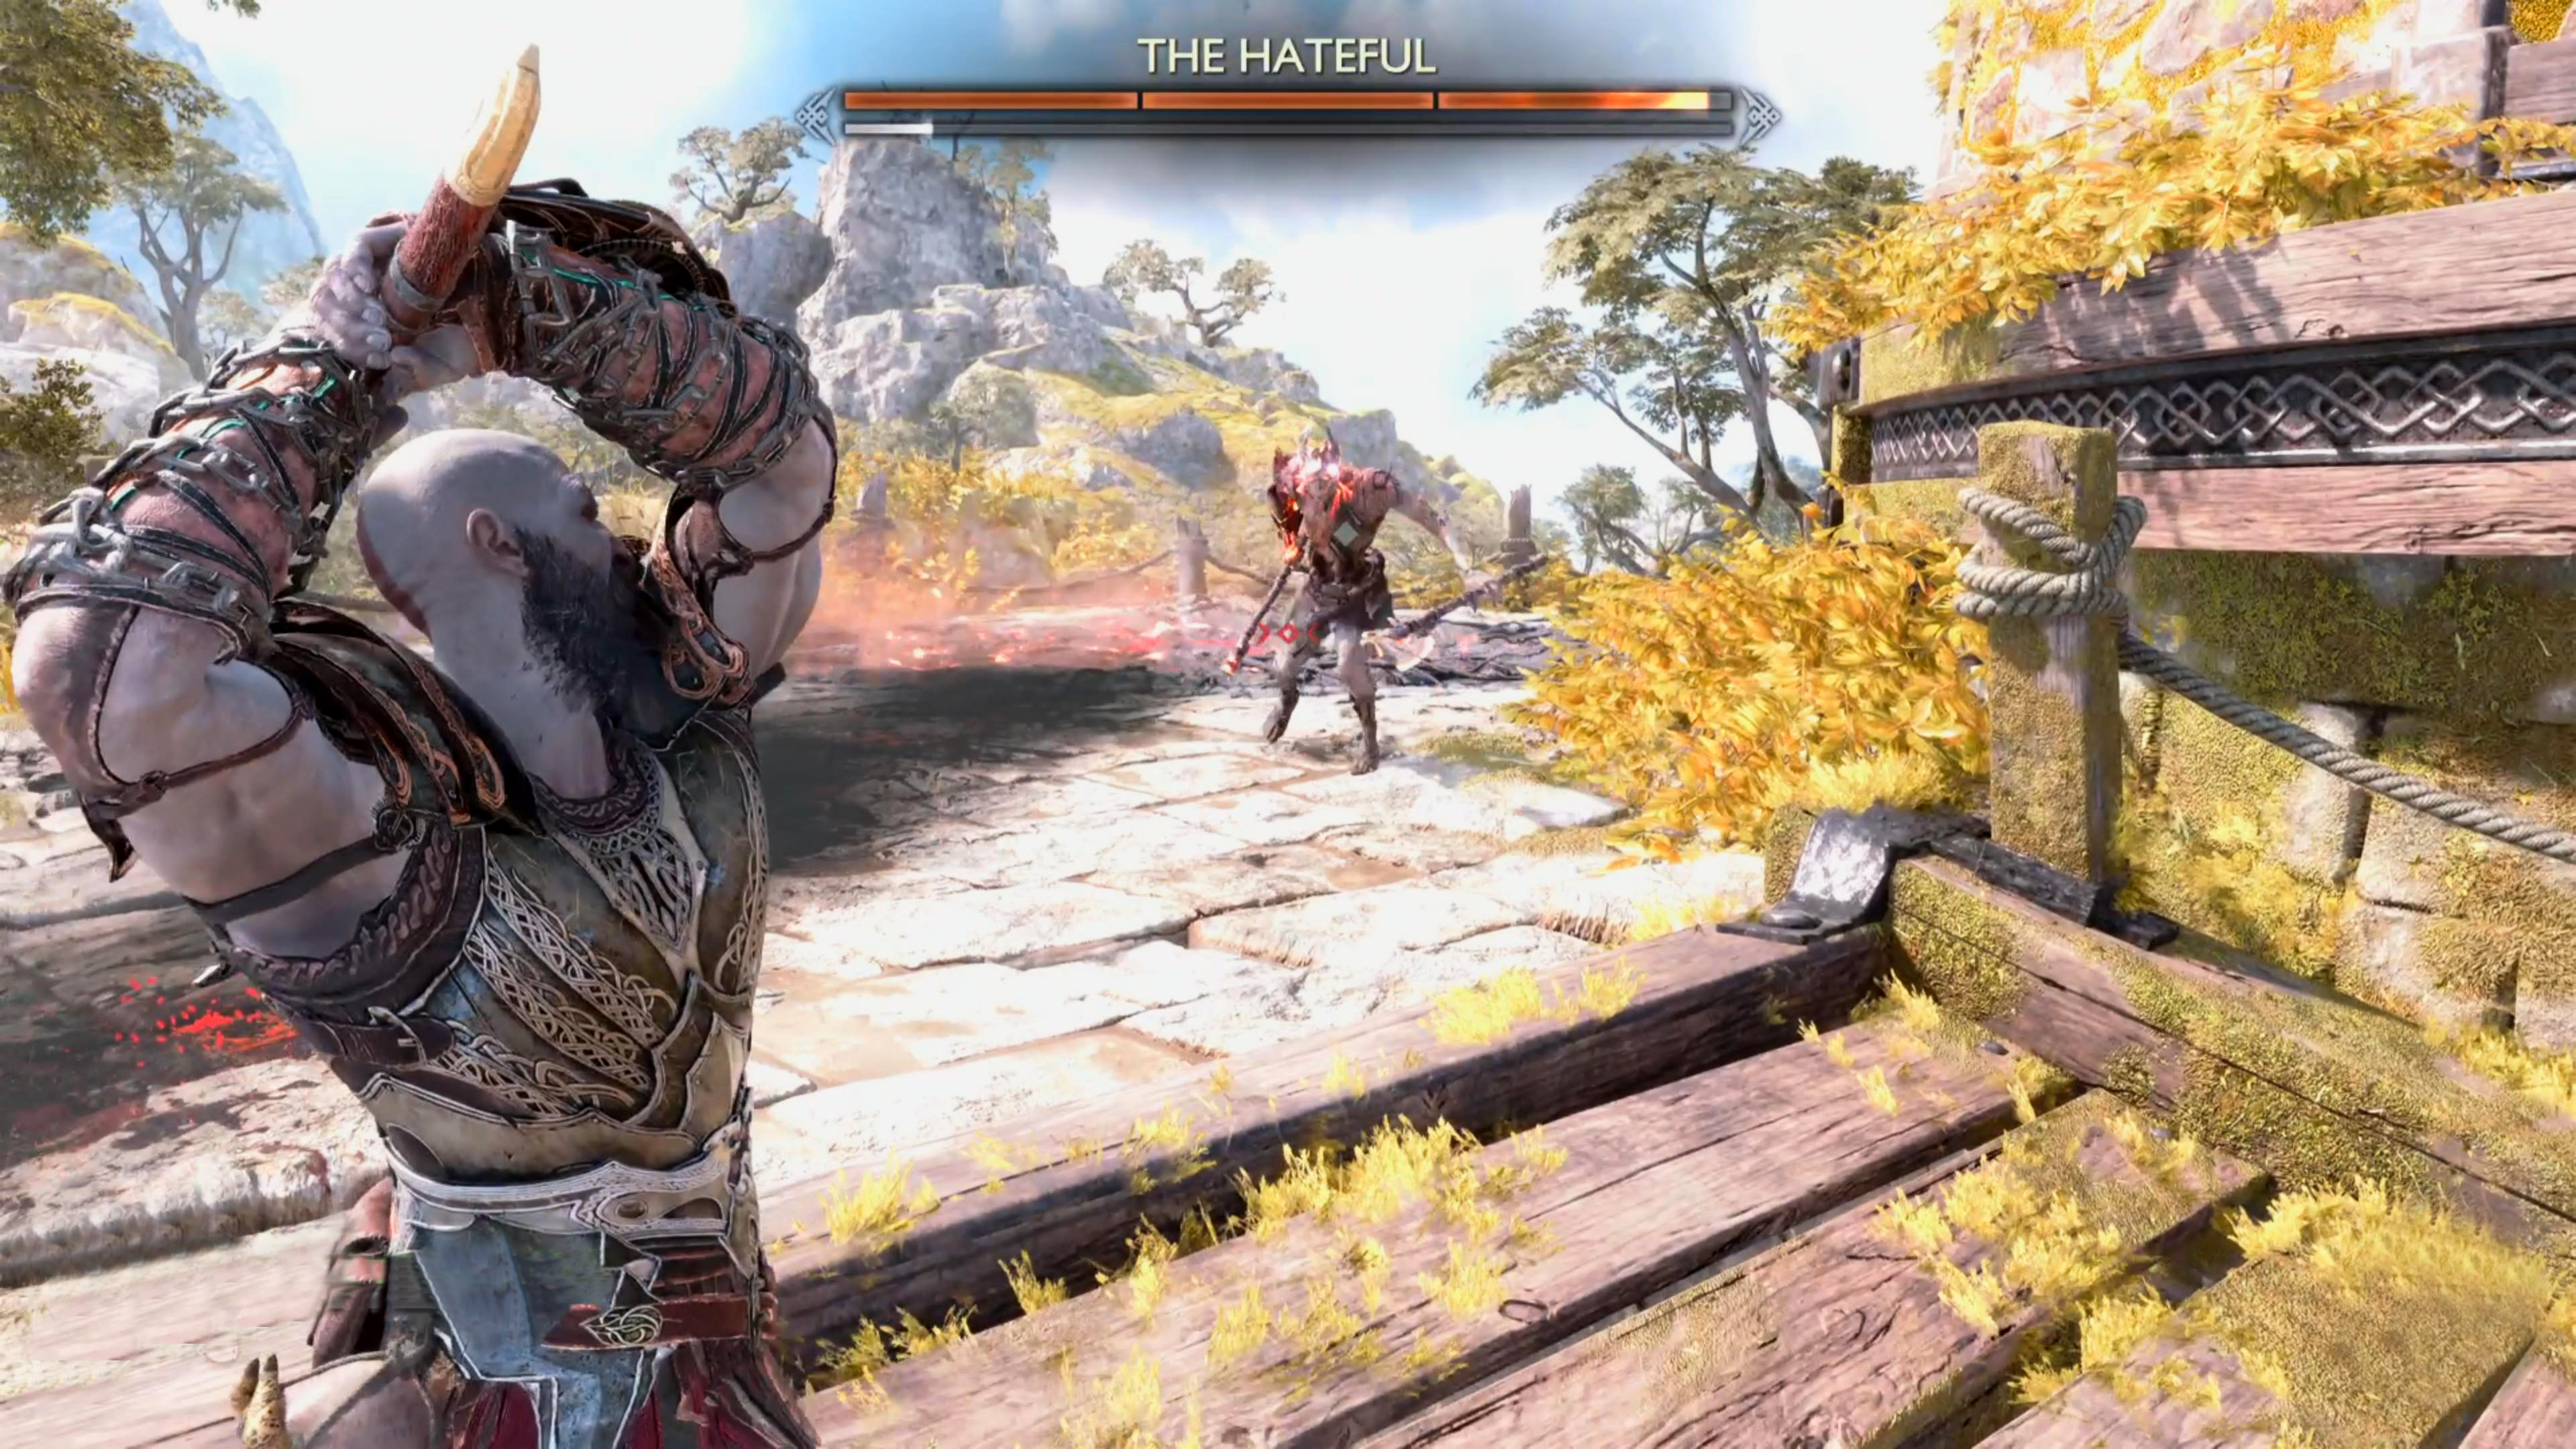 The Hateful is a Draugr miniboss. This particular version can be found at The Watchtower.